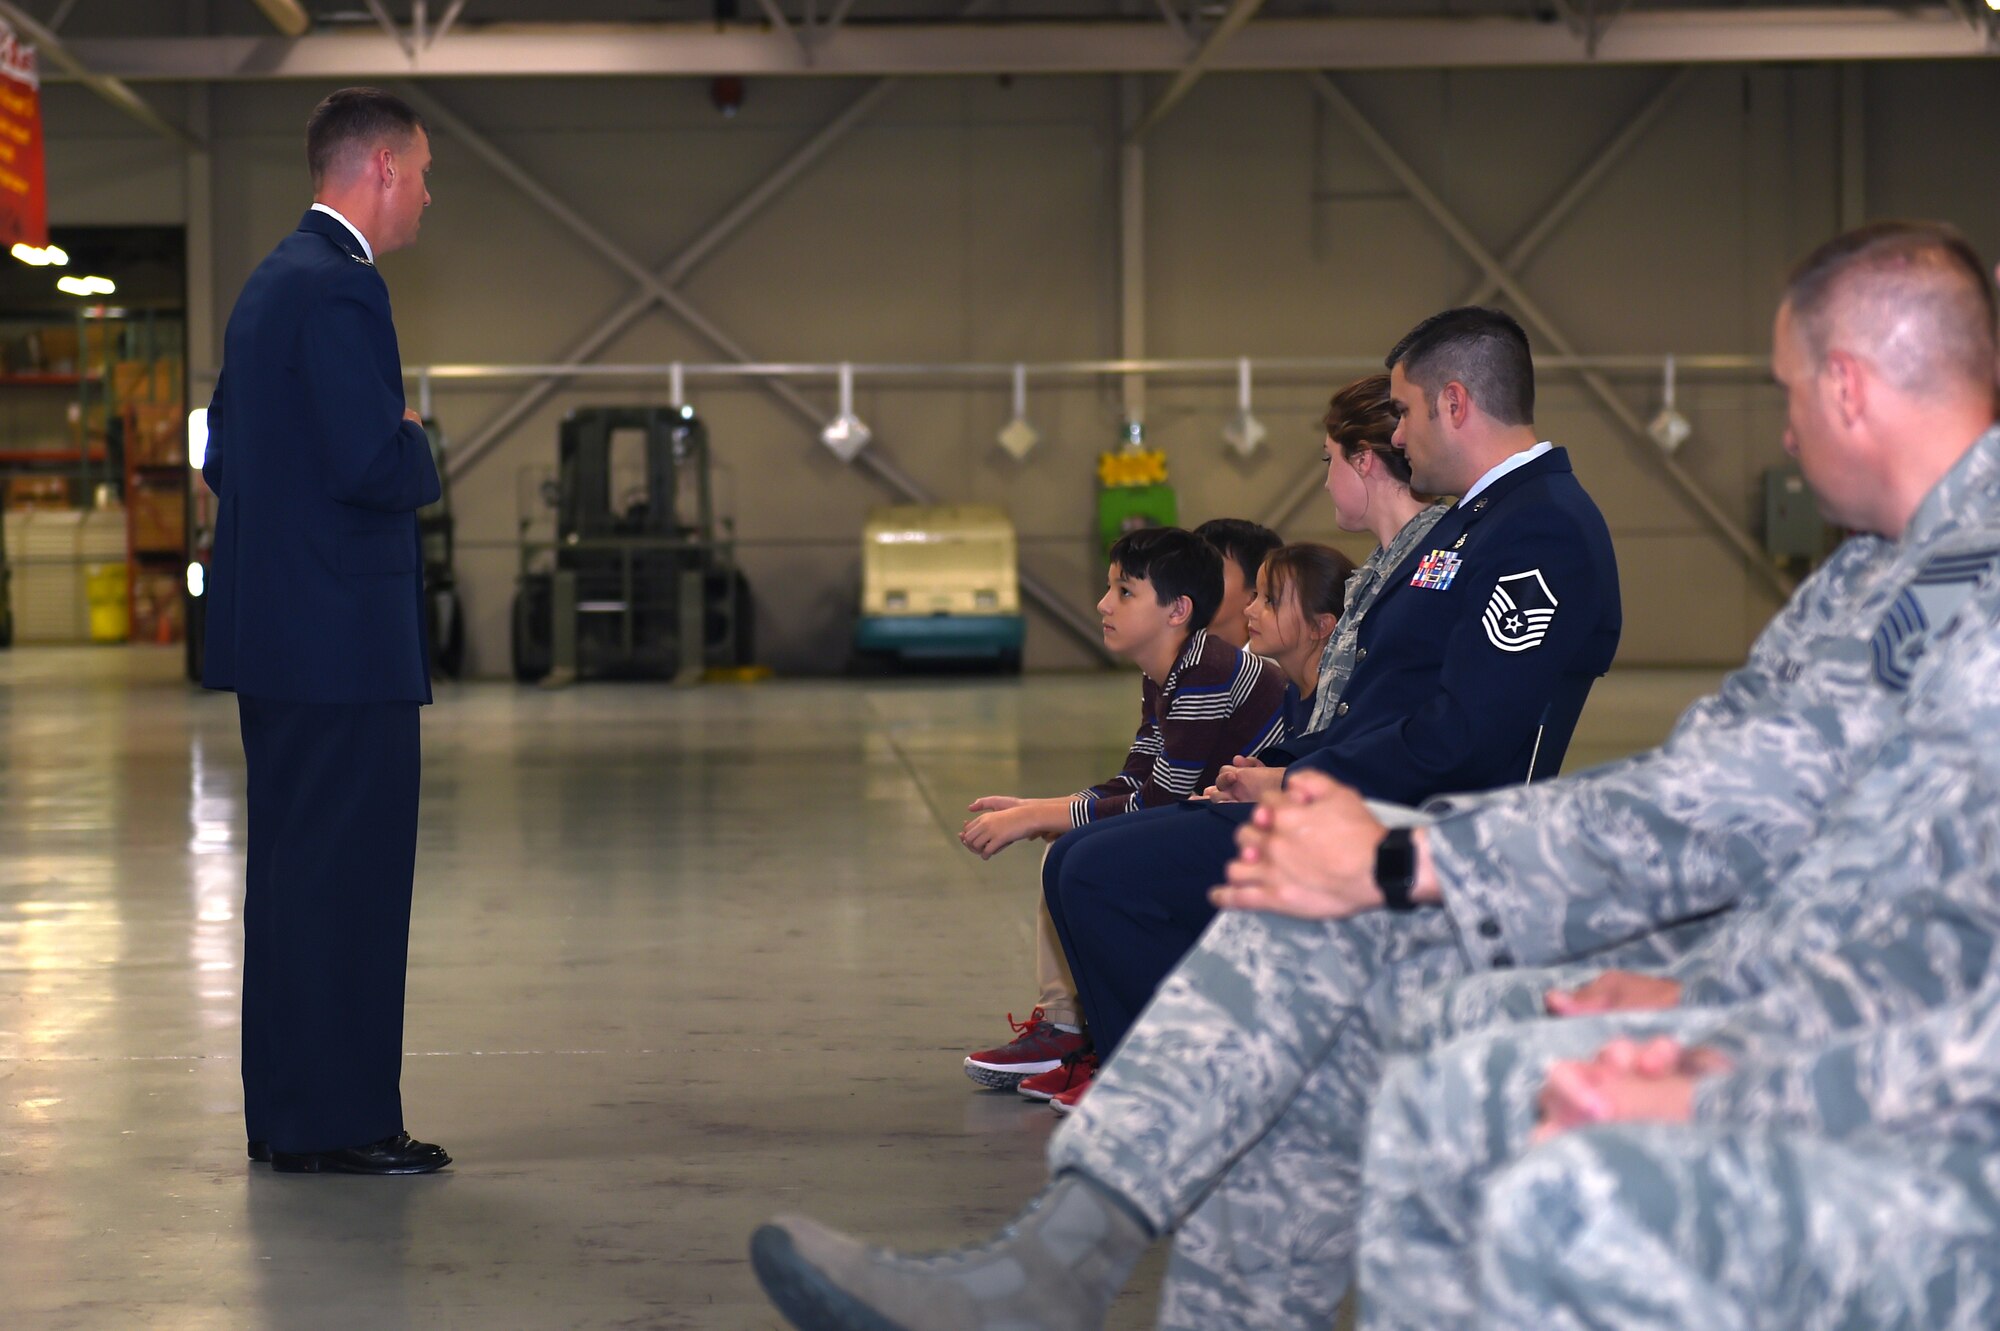 Col. Scovill W. Currin, 62nd Airlift Wing Commander, adresses the family of a Bronze Star award recipient Master Sgt. Derek J. Thompson, inside the 62nd Aerial Port Squadron August 28, 2018.